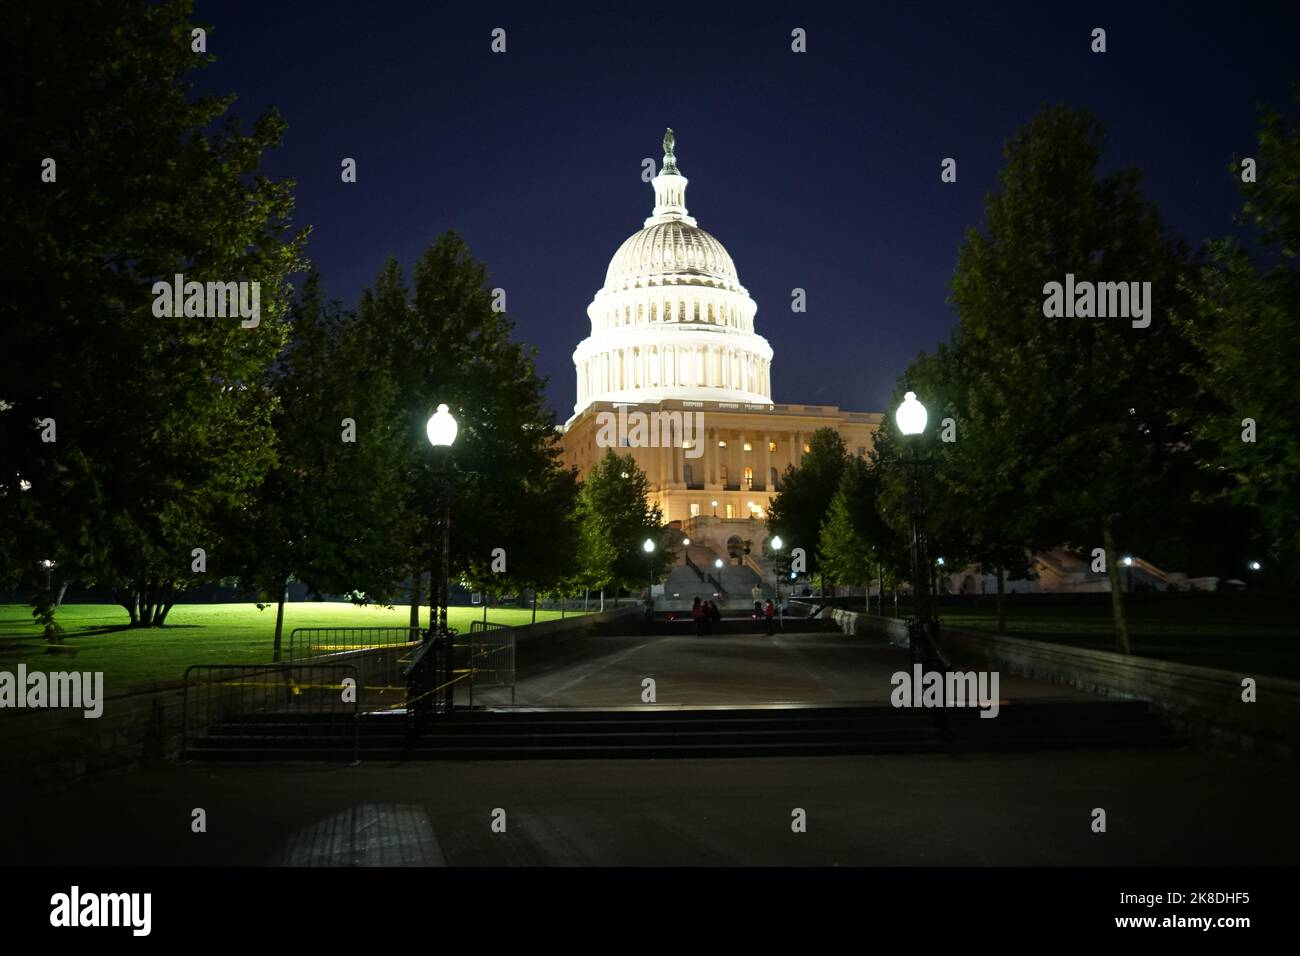 The United States Capitol, often called The Capitol or the Capitol Building, is the seat of the legislative branch of the U.S. federal government, whi Stock Photo